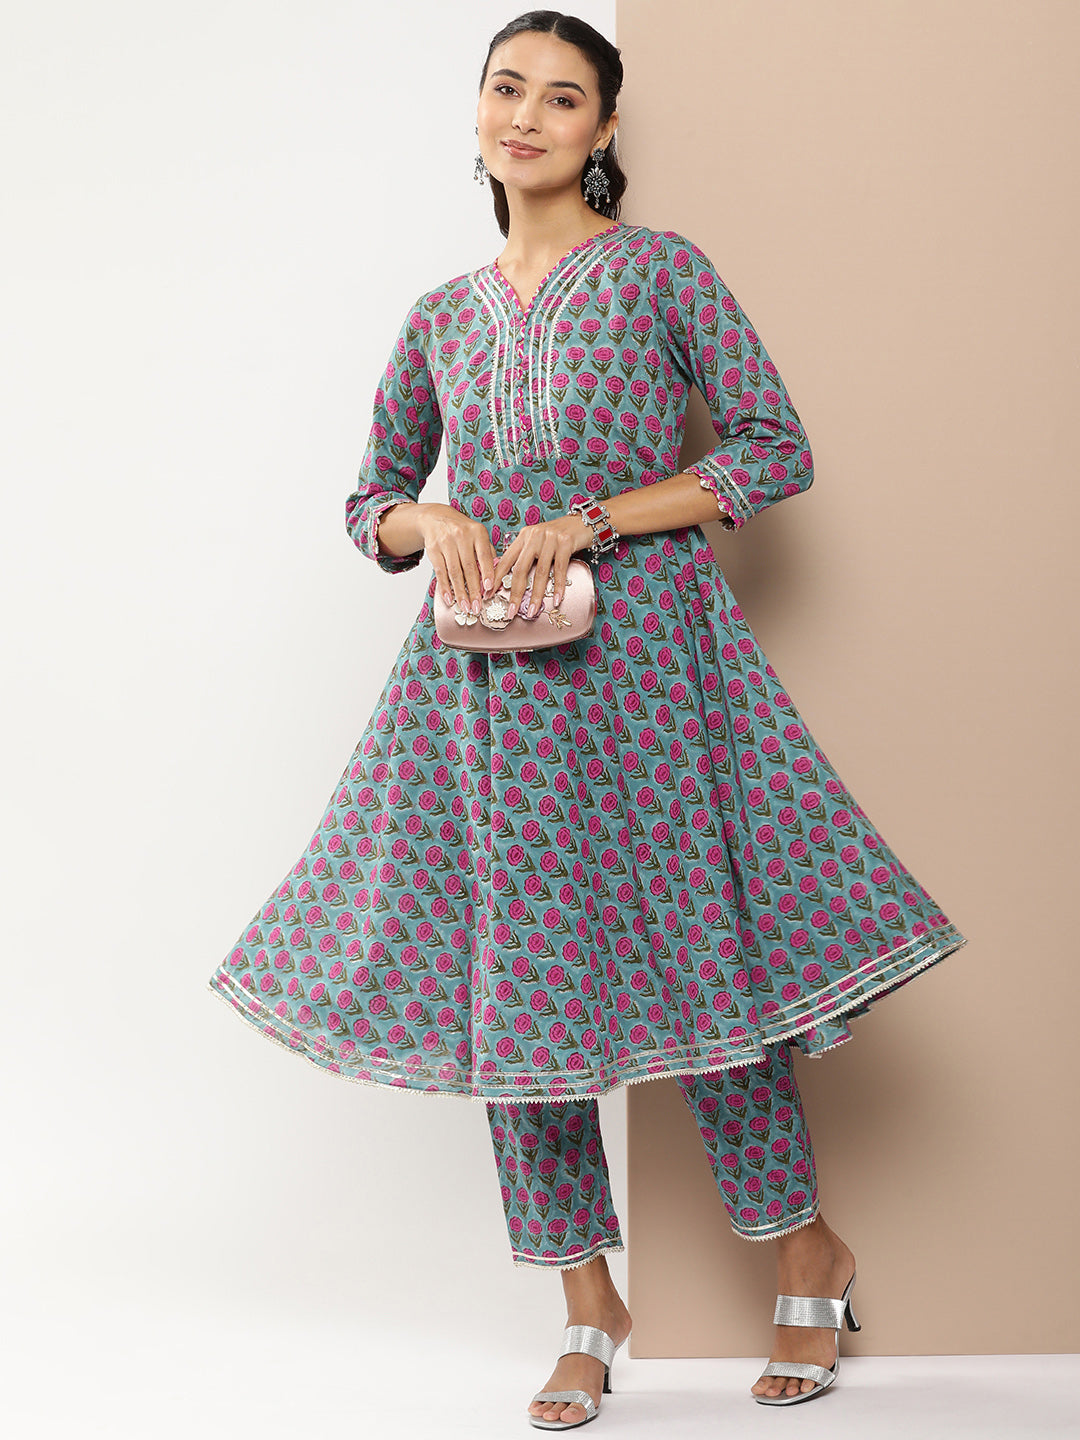 Bhama Couture Teal Blue Floral Print Anarkali Kurta With Gotta Patti Details With Teal Blue Floral Print Palazzos.